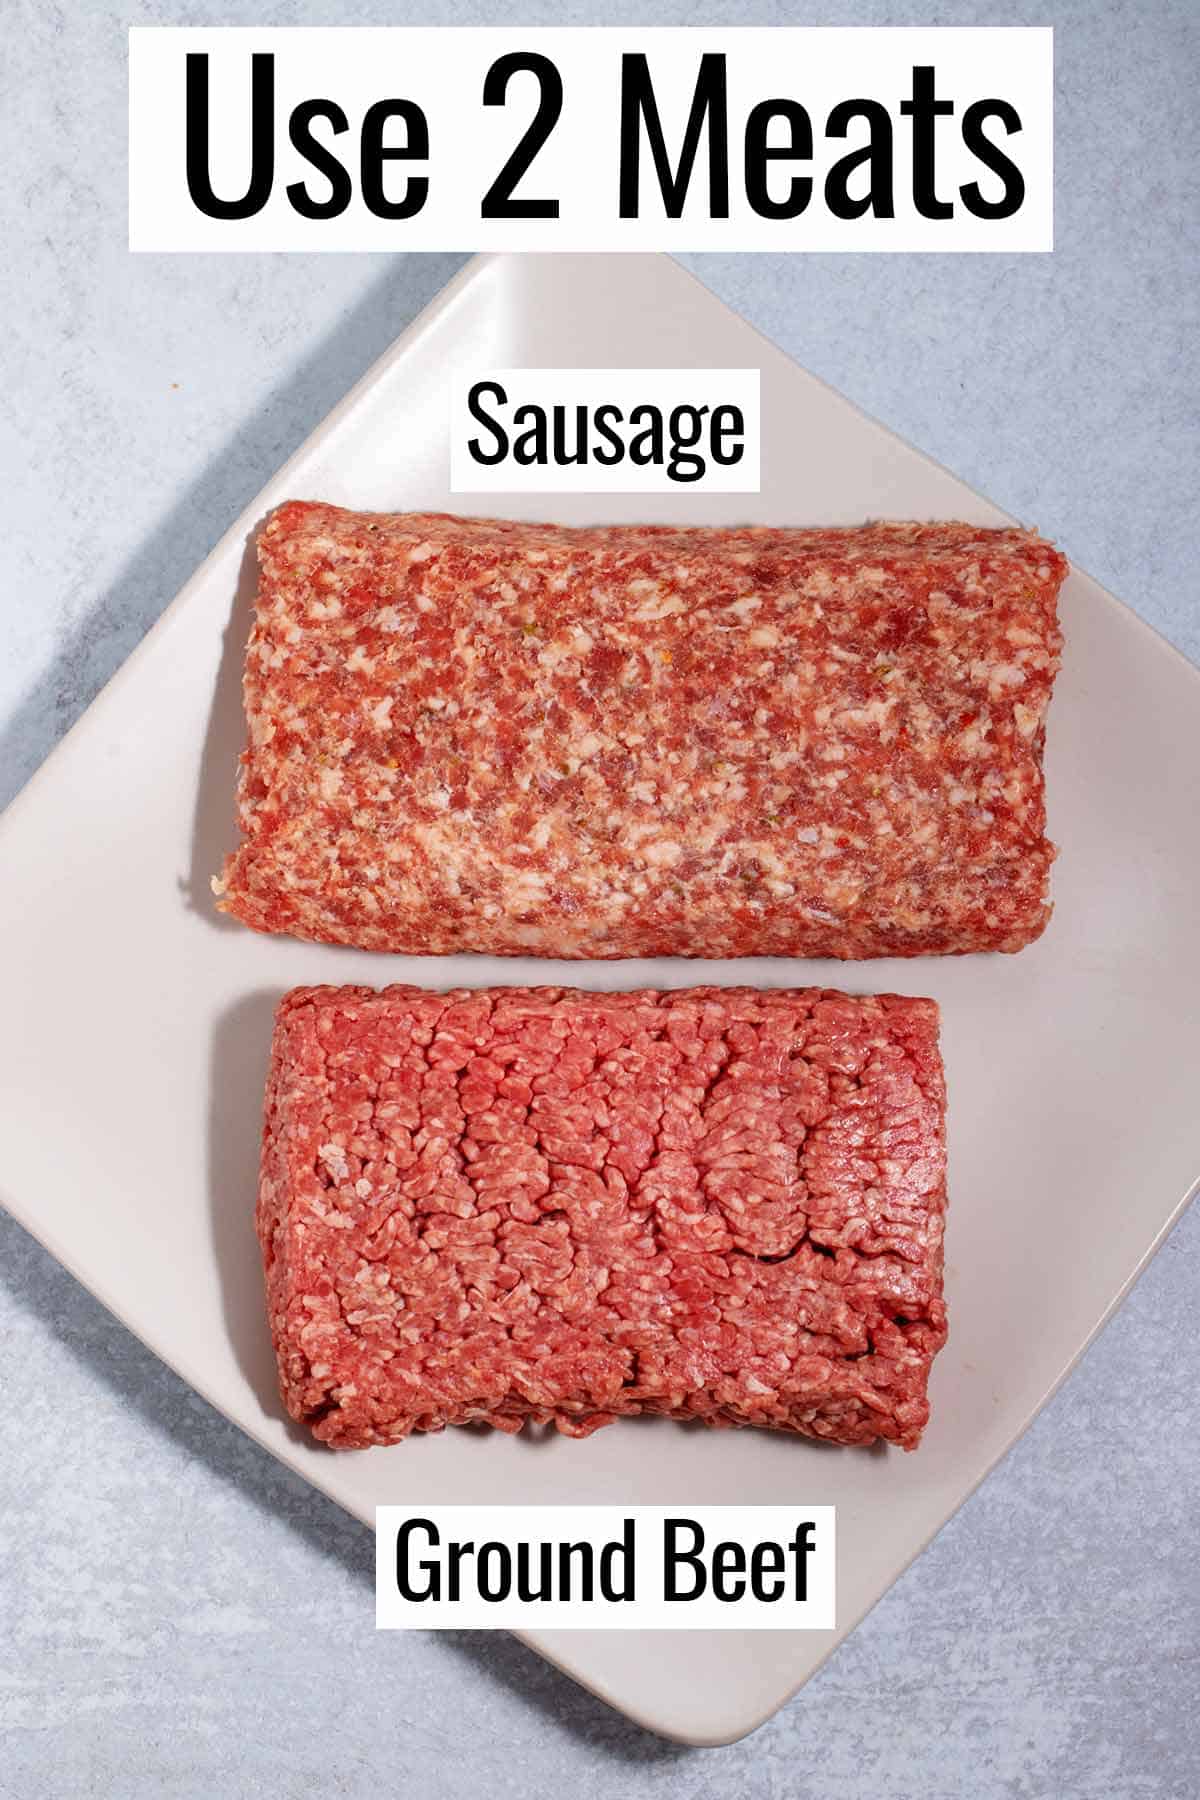 Raw ground sausage and raw hamburger meat on a plate.